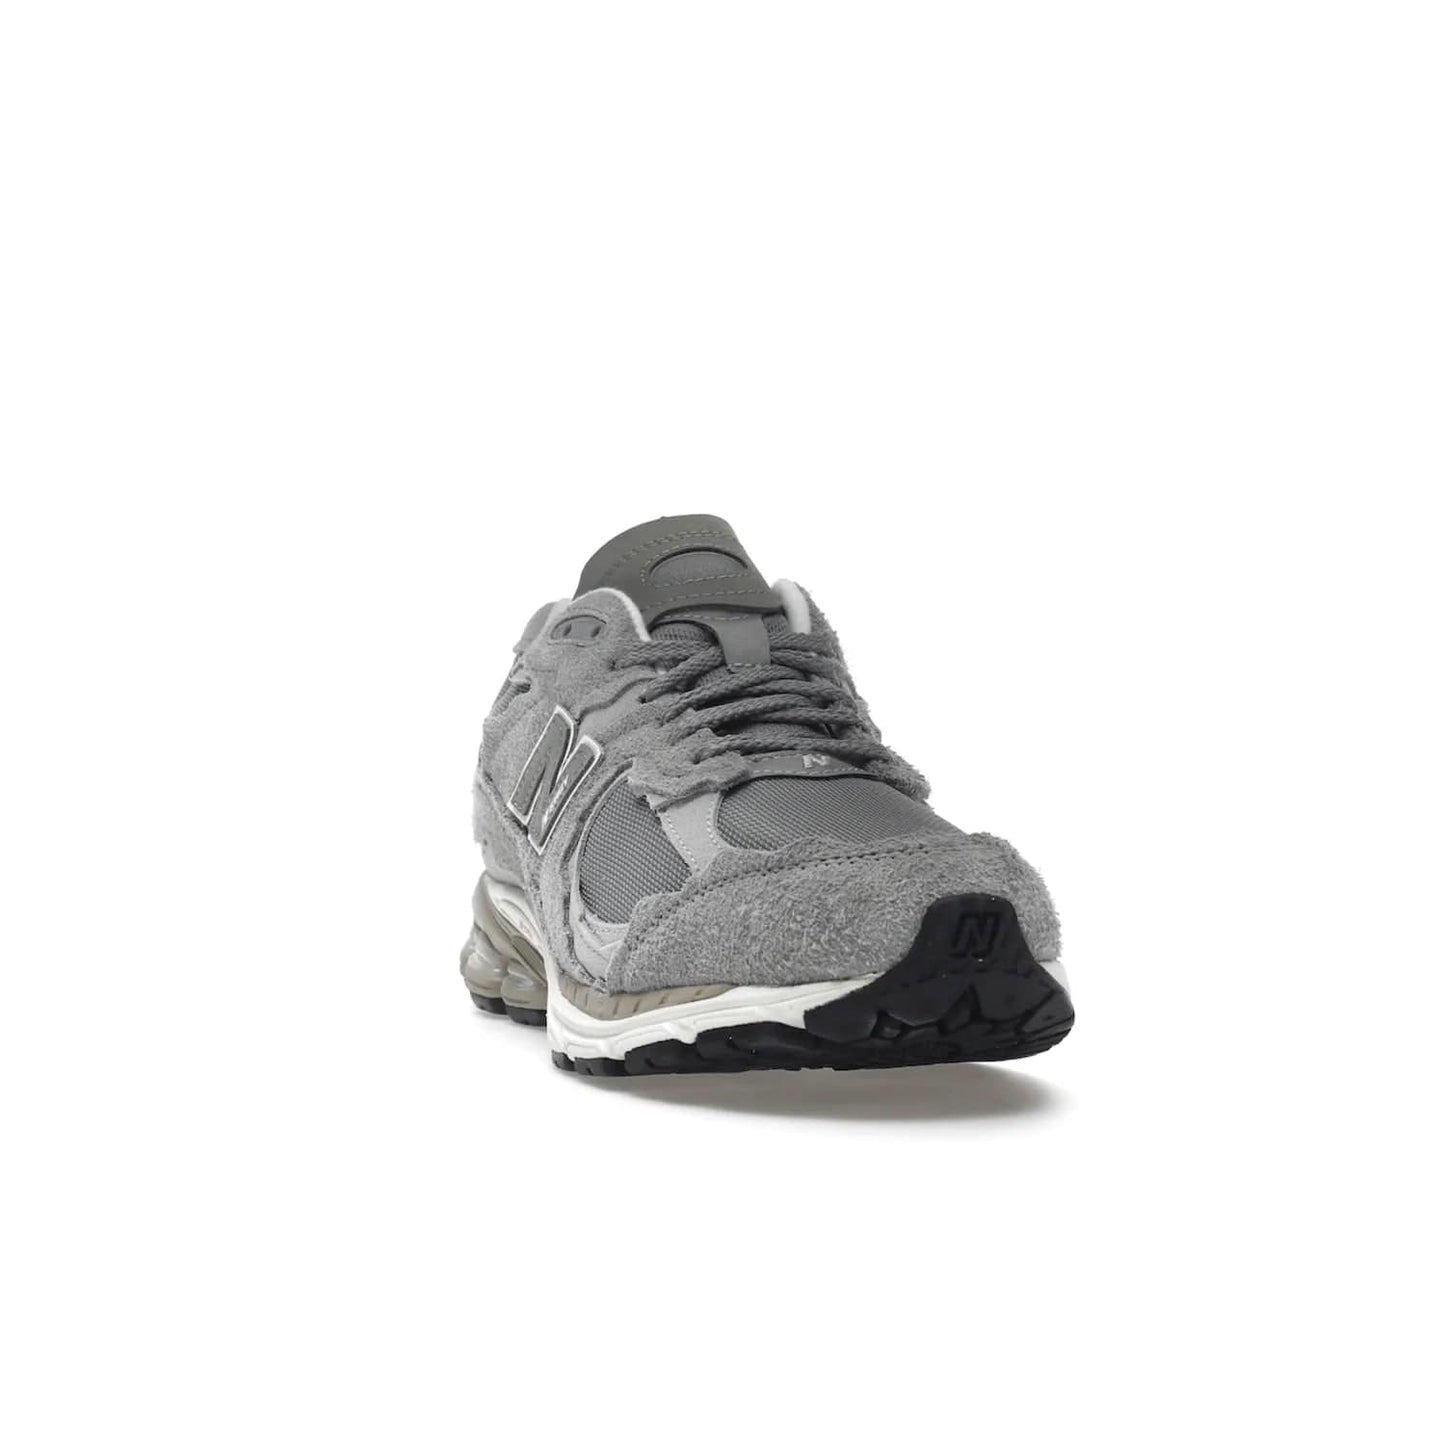 New Balance 2002R Protection Pack Grey - Image 8 - Only at www.BallersClubKickz.com - The New Balance 2002R Protection Pack Grey provides superior protection and all-day comfort. It features a blend of synthetic and mesh materials, foam midsole, rubber outsole, and a toe cap and heel counter. Show off the classic "N" logo and "2002R" lettering. Get a pair on February 14, 2023 for protection and style.